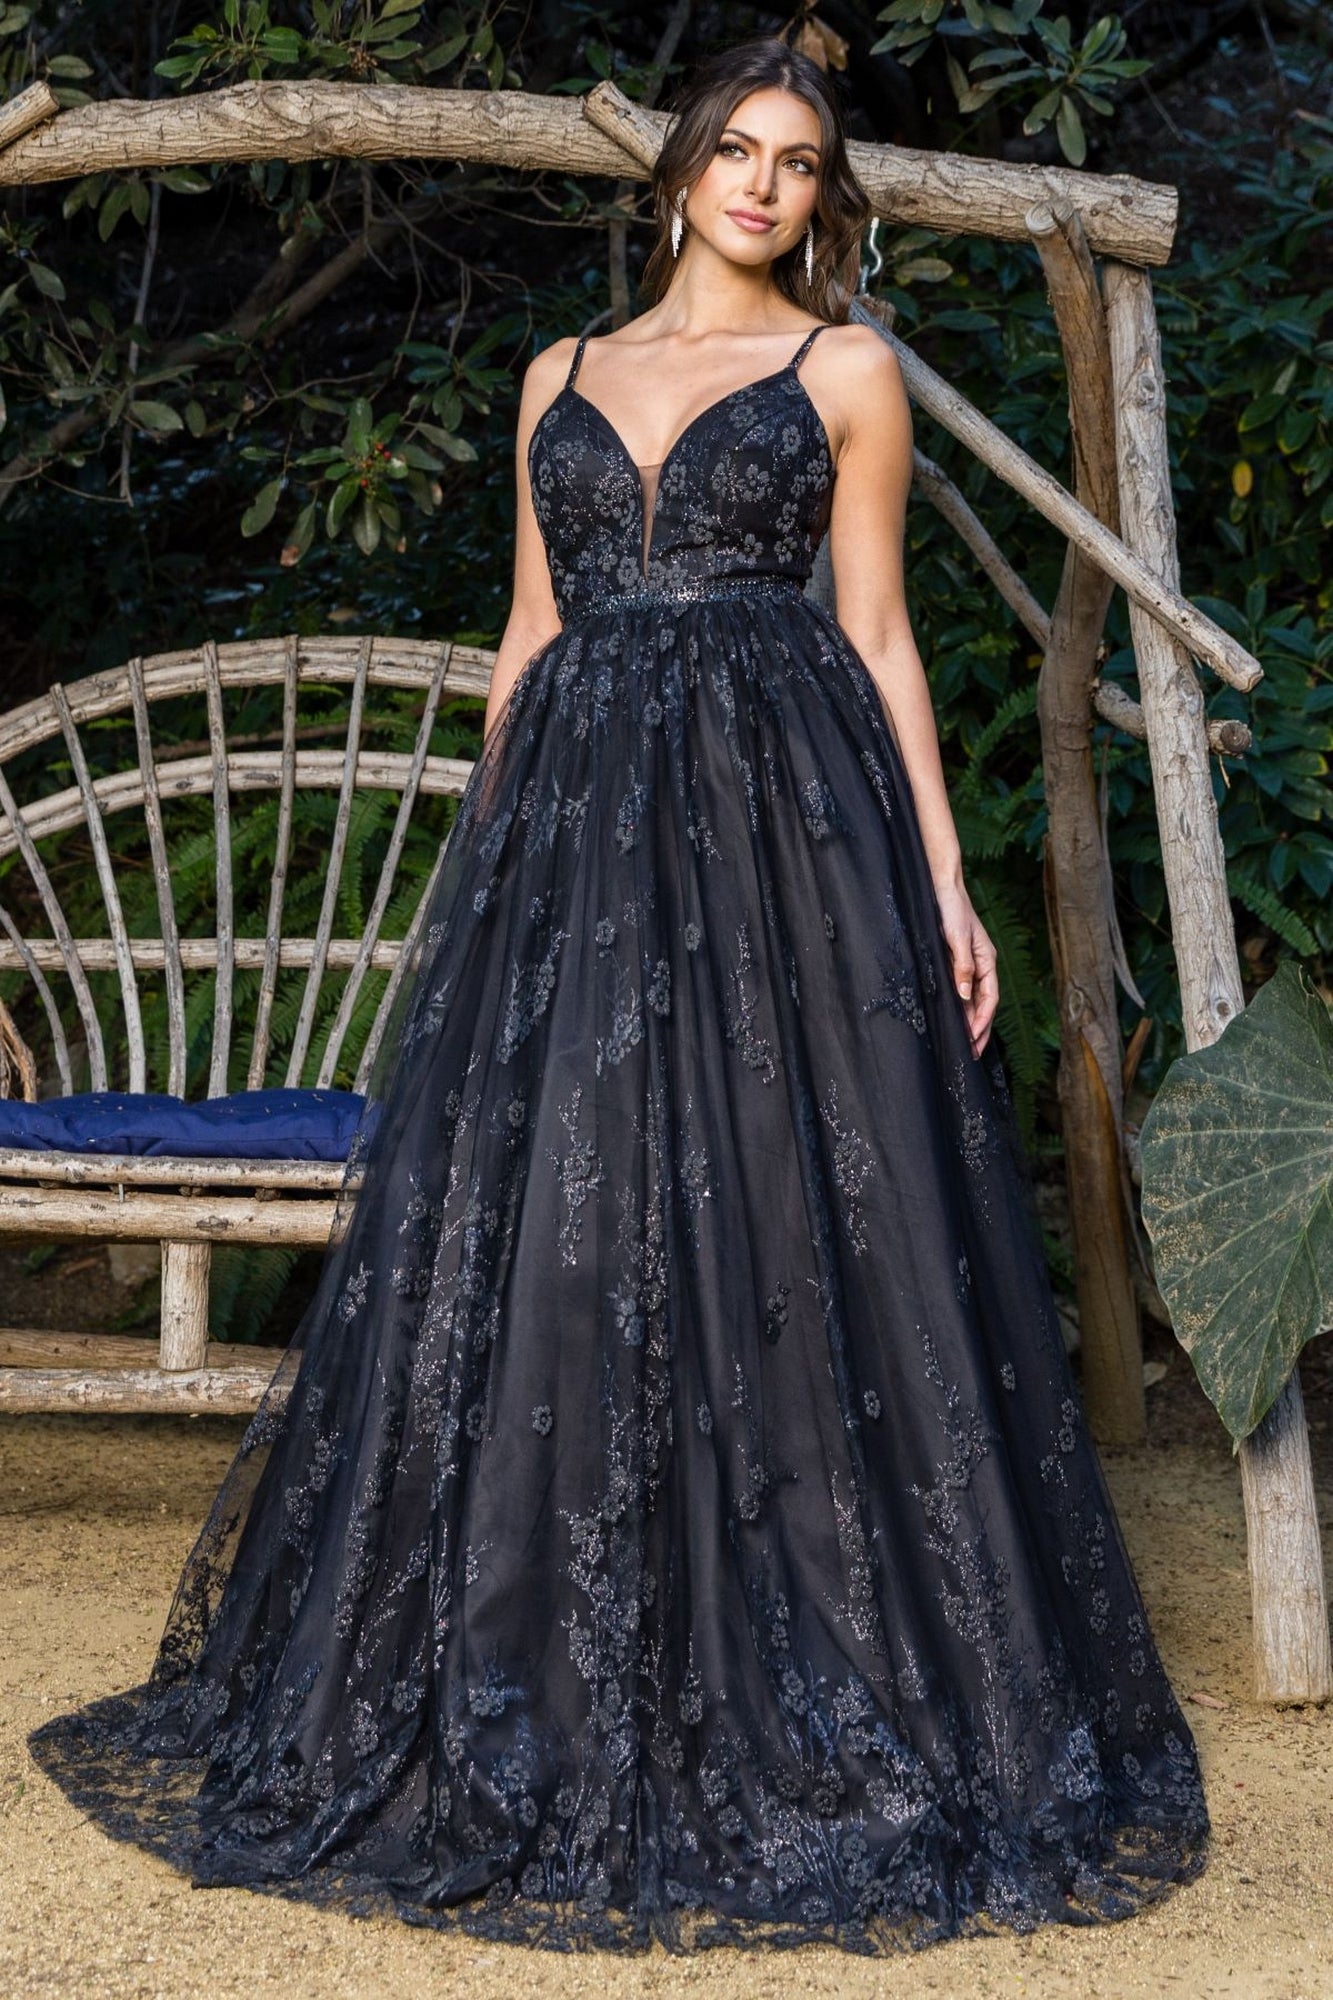 Lace Sheer-Corset Long Prom Ball Gown - PromGirl